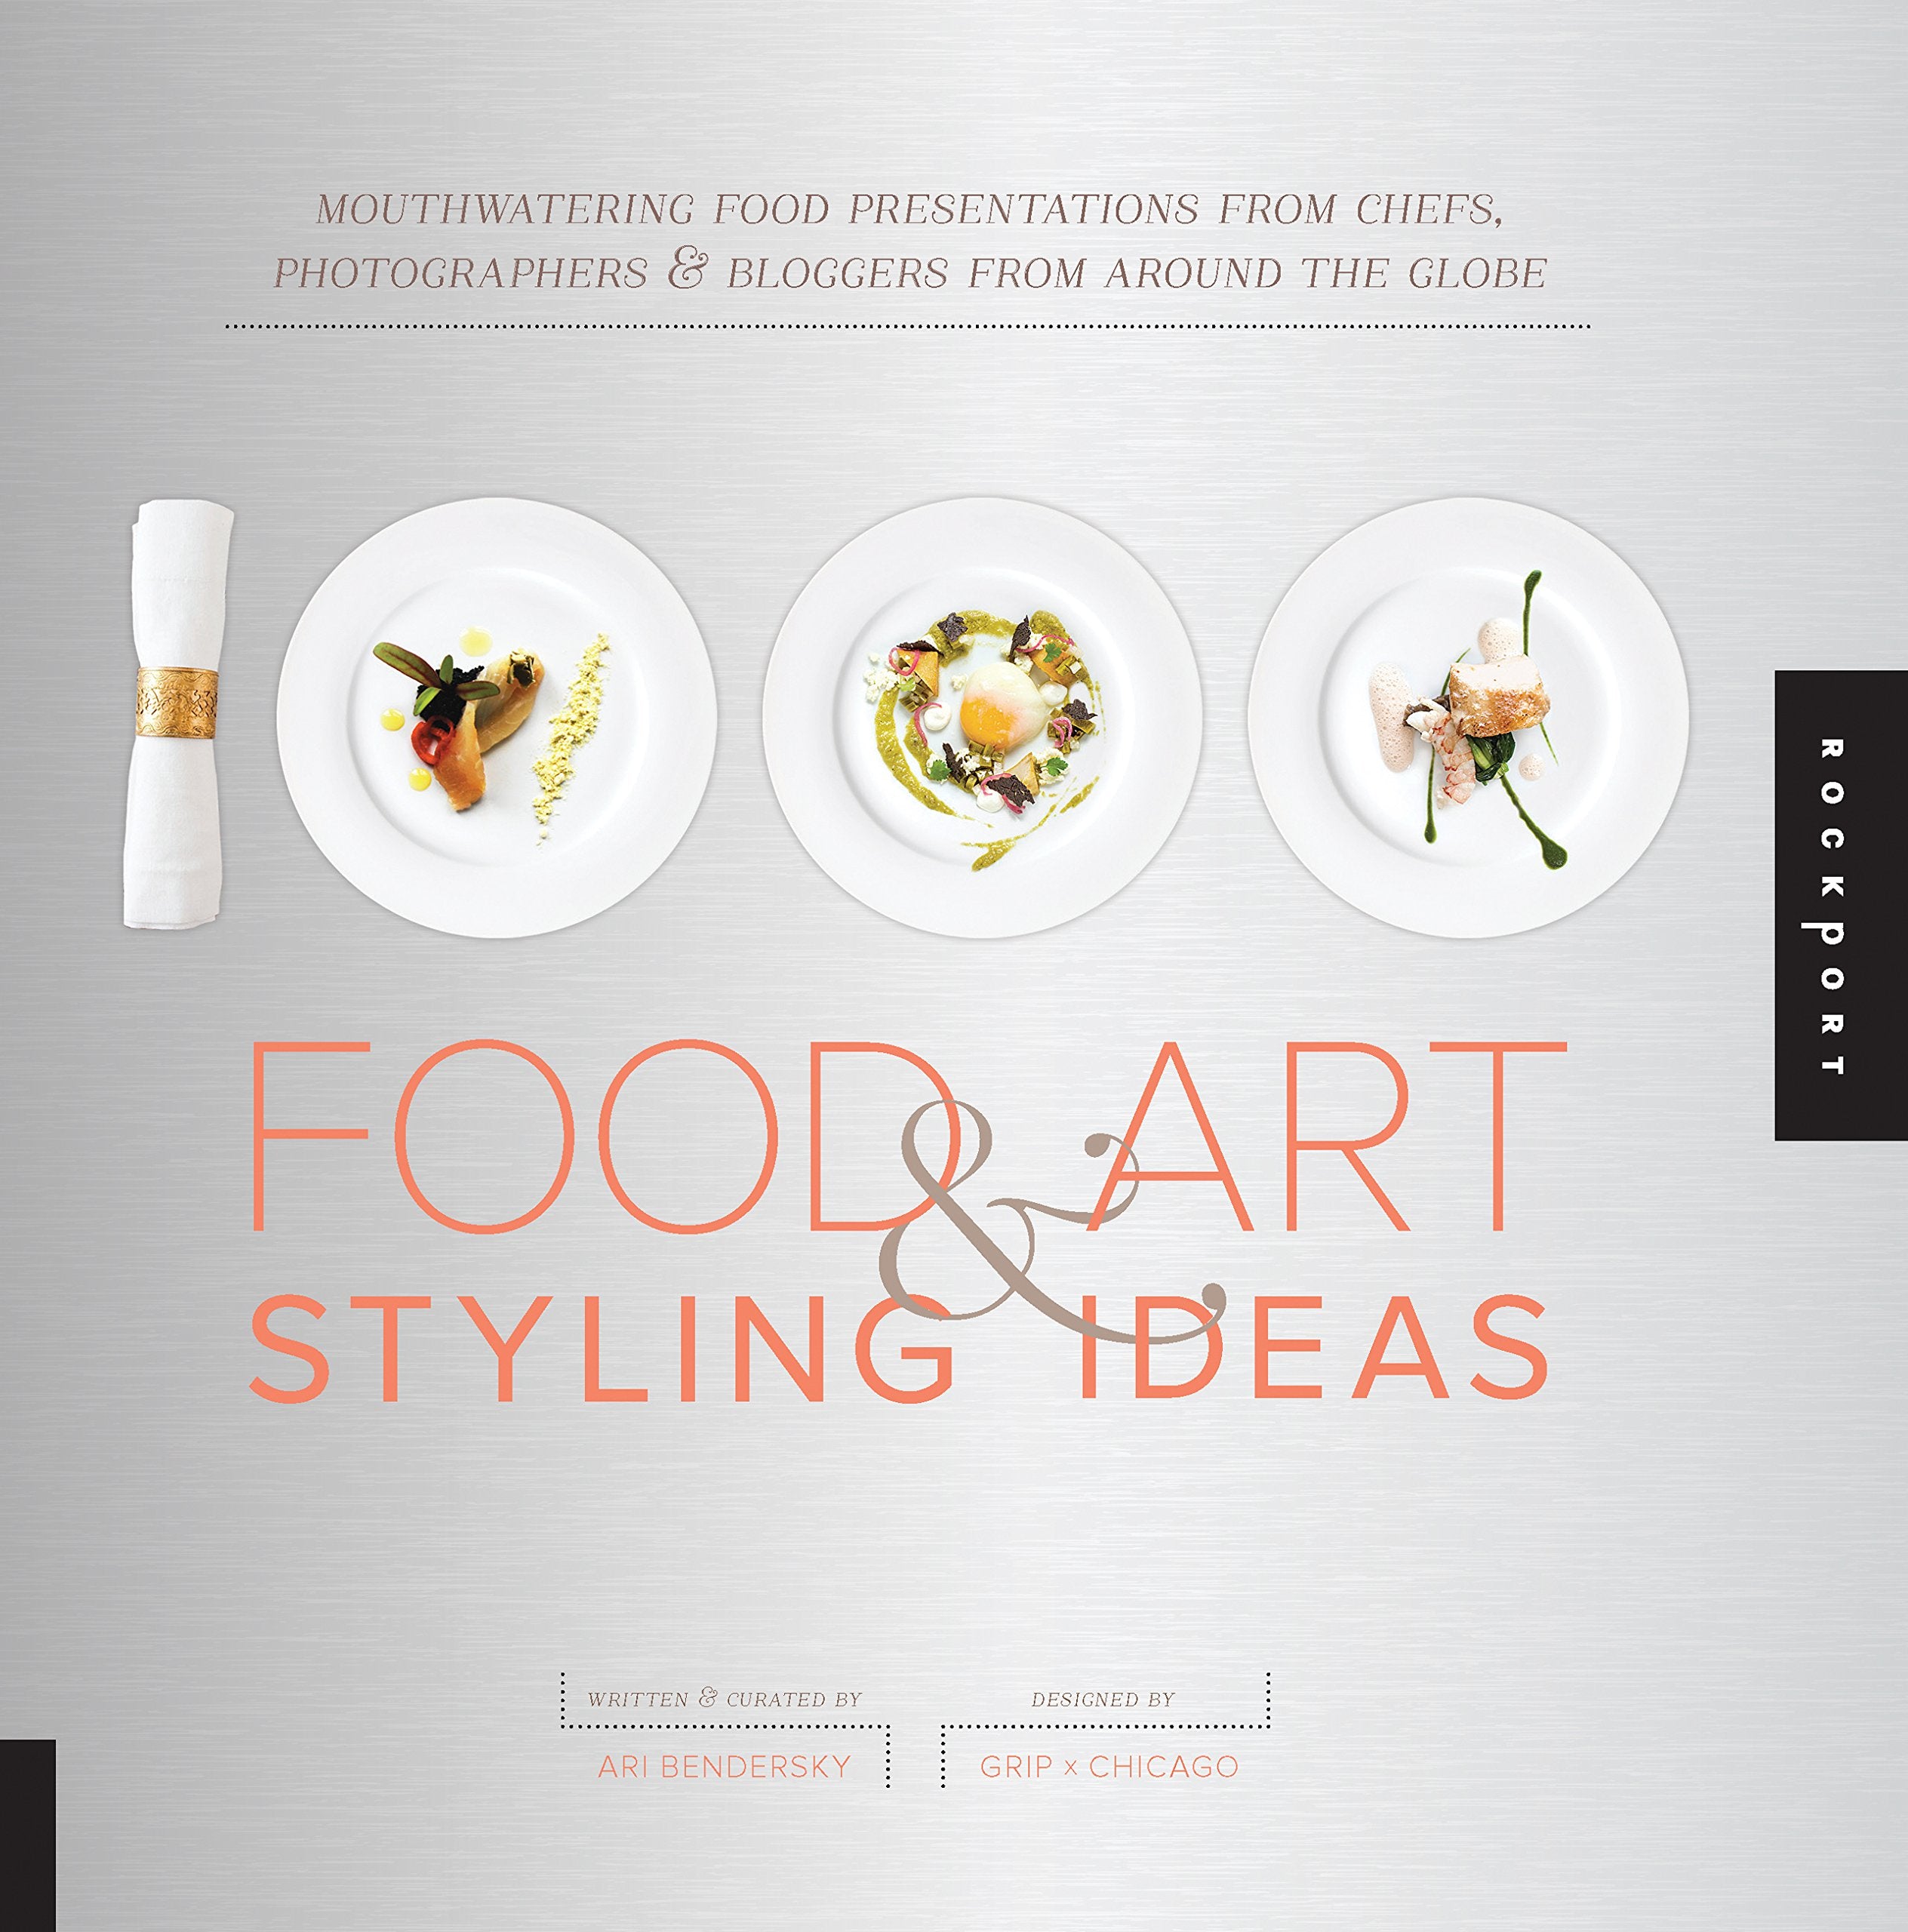 1,000 Food & Art Styling Ideas: Mouthwatering Food Presentations from Chefs, Photographers, and Bloggers from Around the Globe (Ari Bendersky)